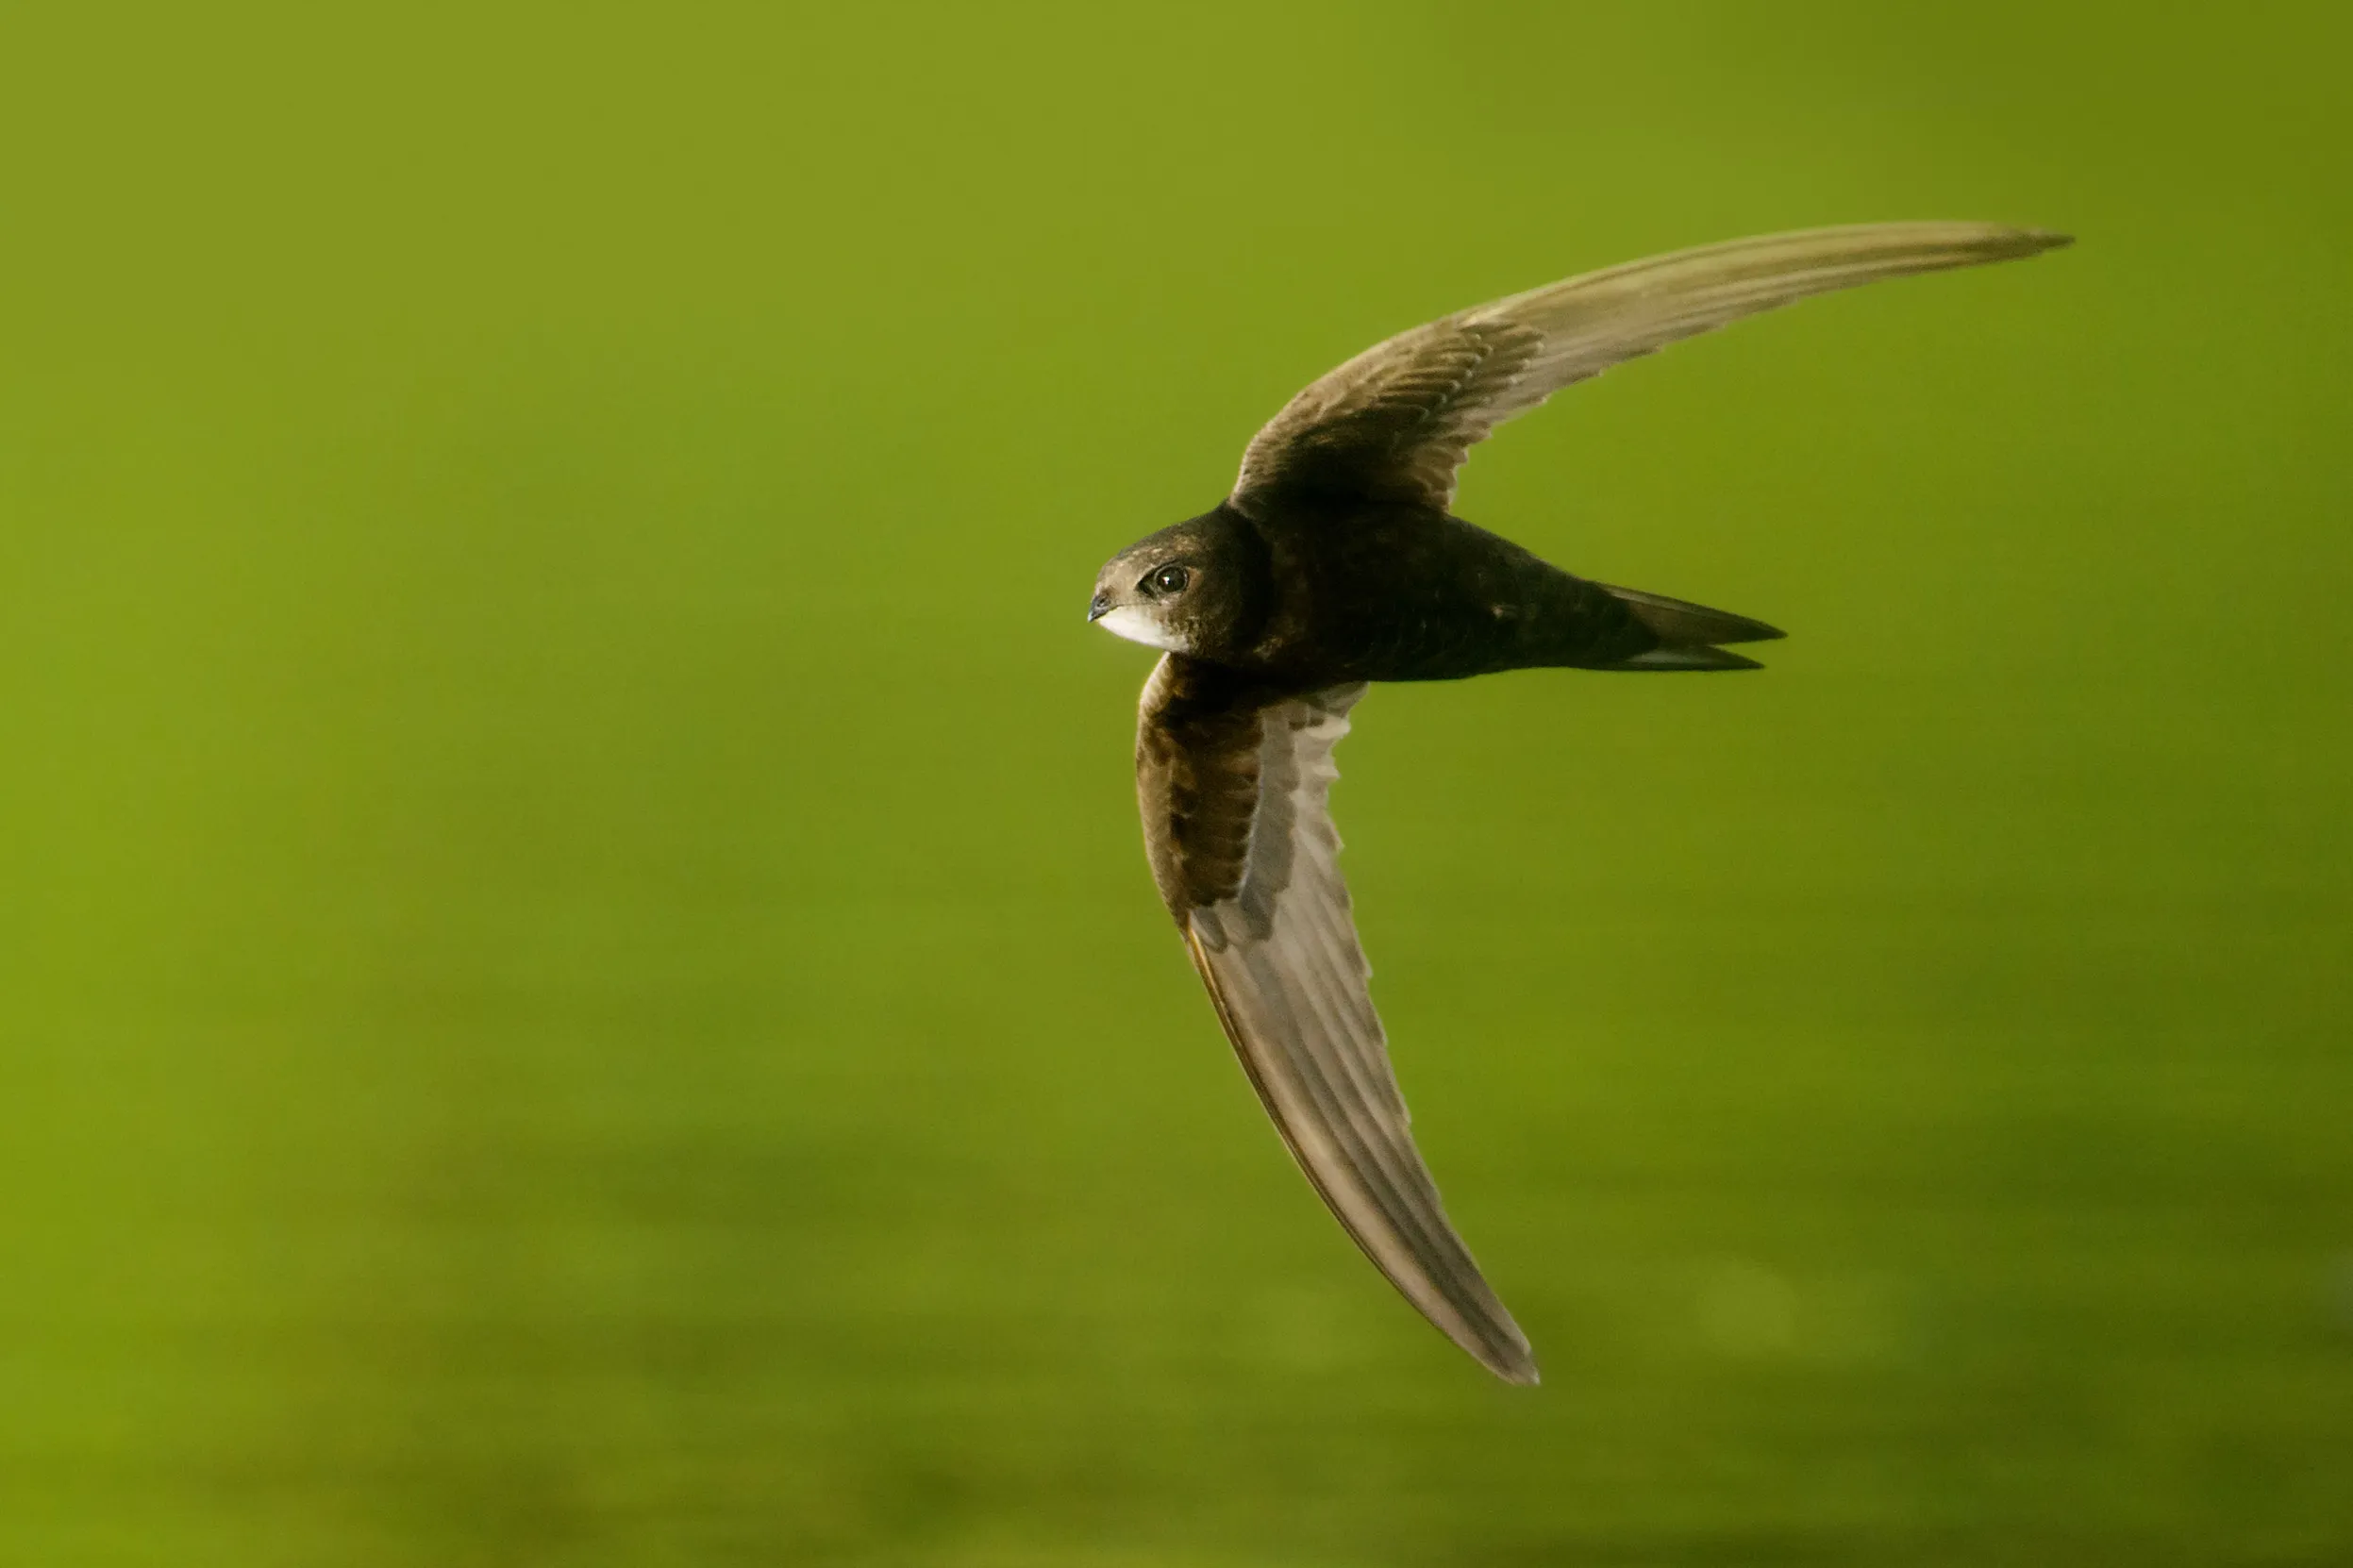 A Swift in mid flight against a background of greenery.